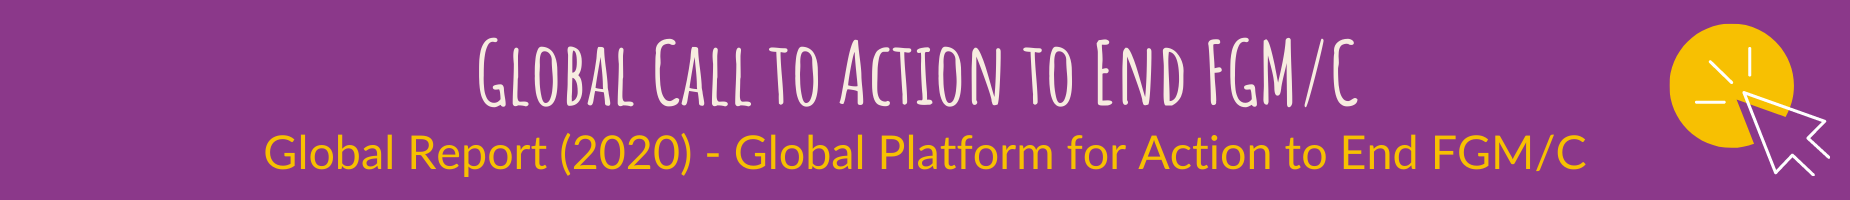 Global Call to Action to End FGM/C (Global Platform for Action to End FGM/C) - Global Report 2020